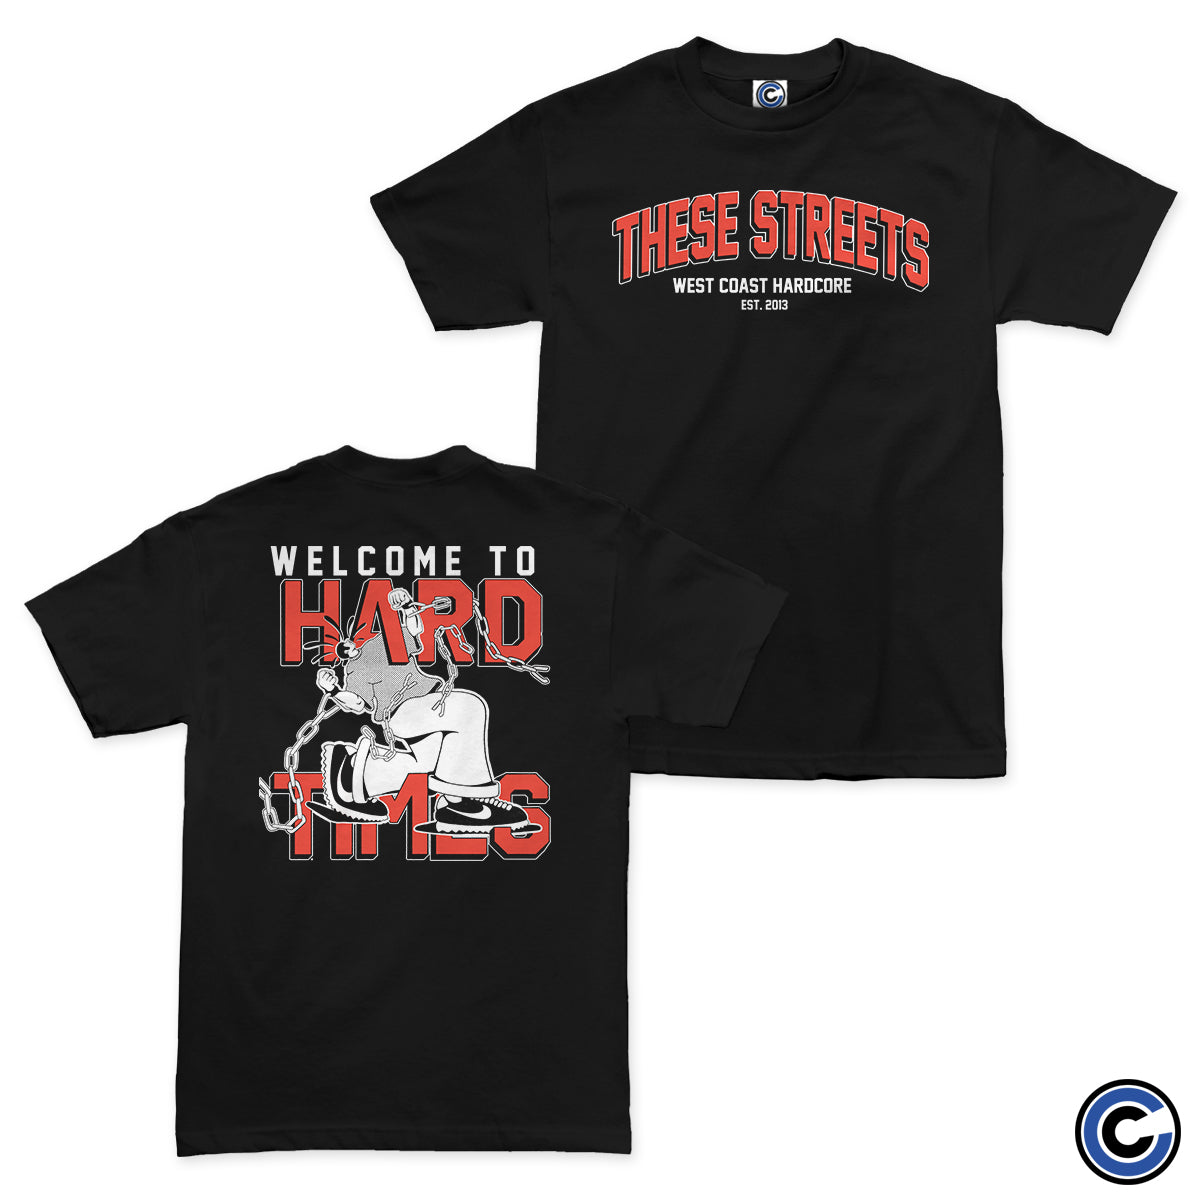 These Streets "Hard Times" Shirt